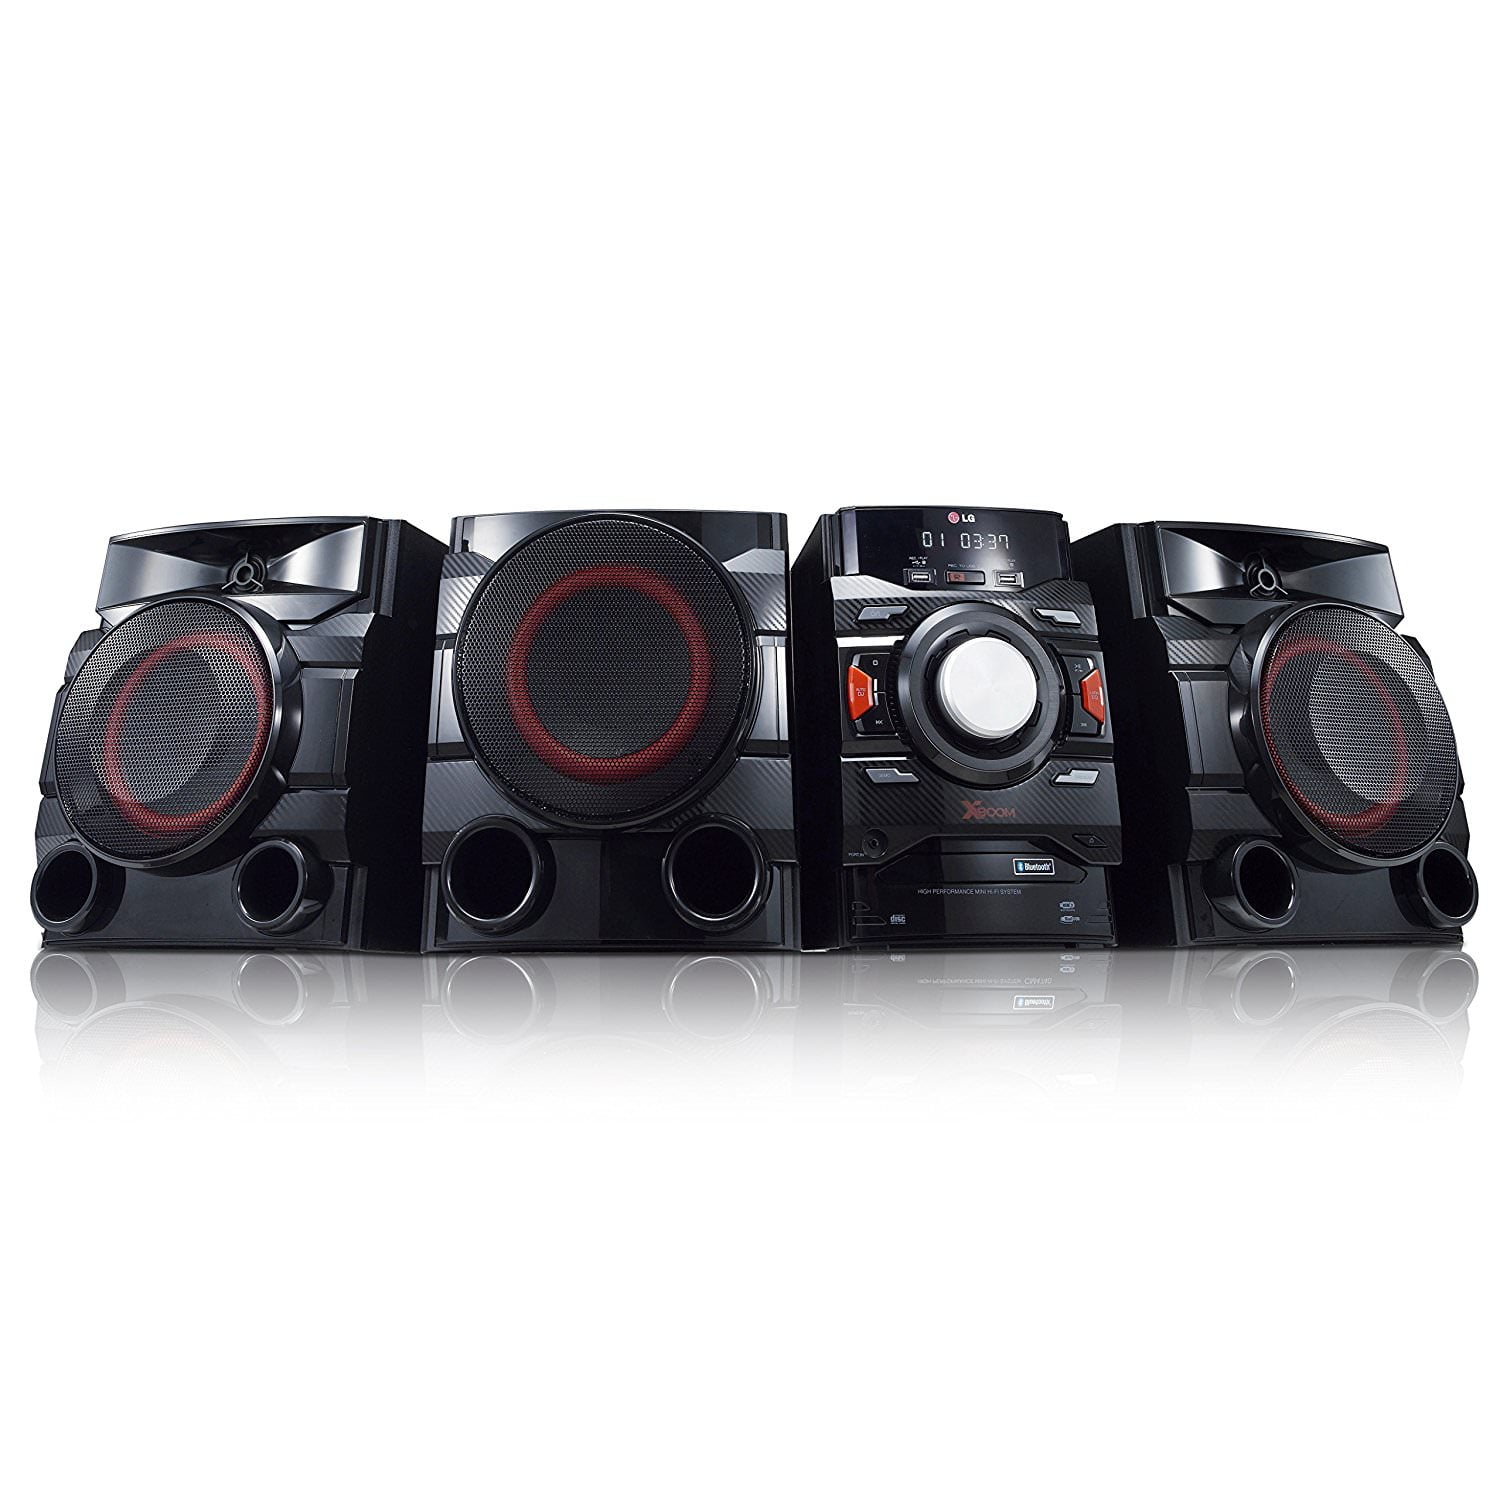 Lg Cm4550 700w 2 1ch Mini Shelf System With Built In Subwoofer And